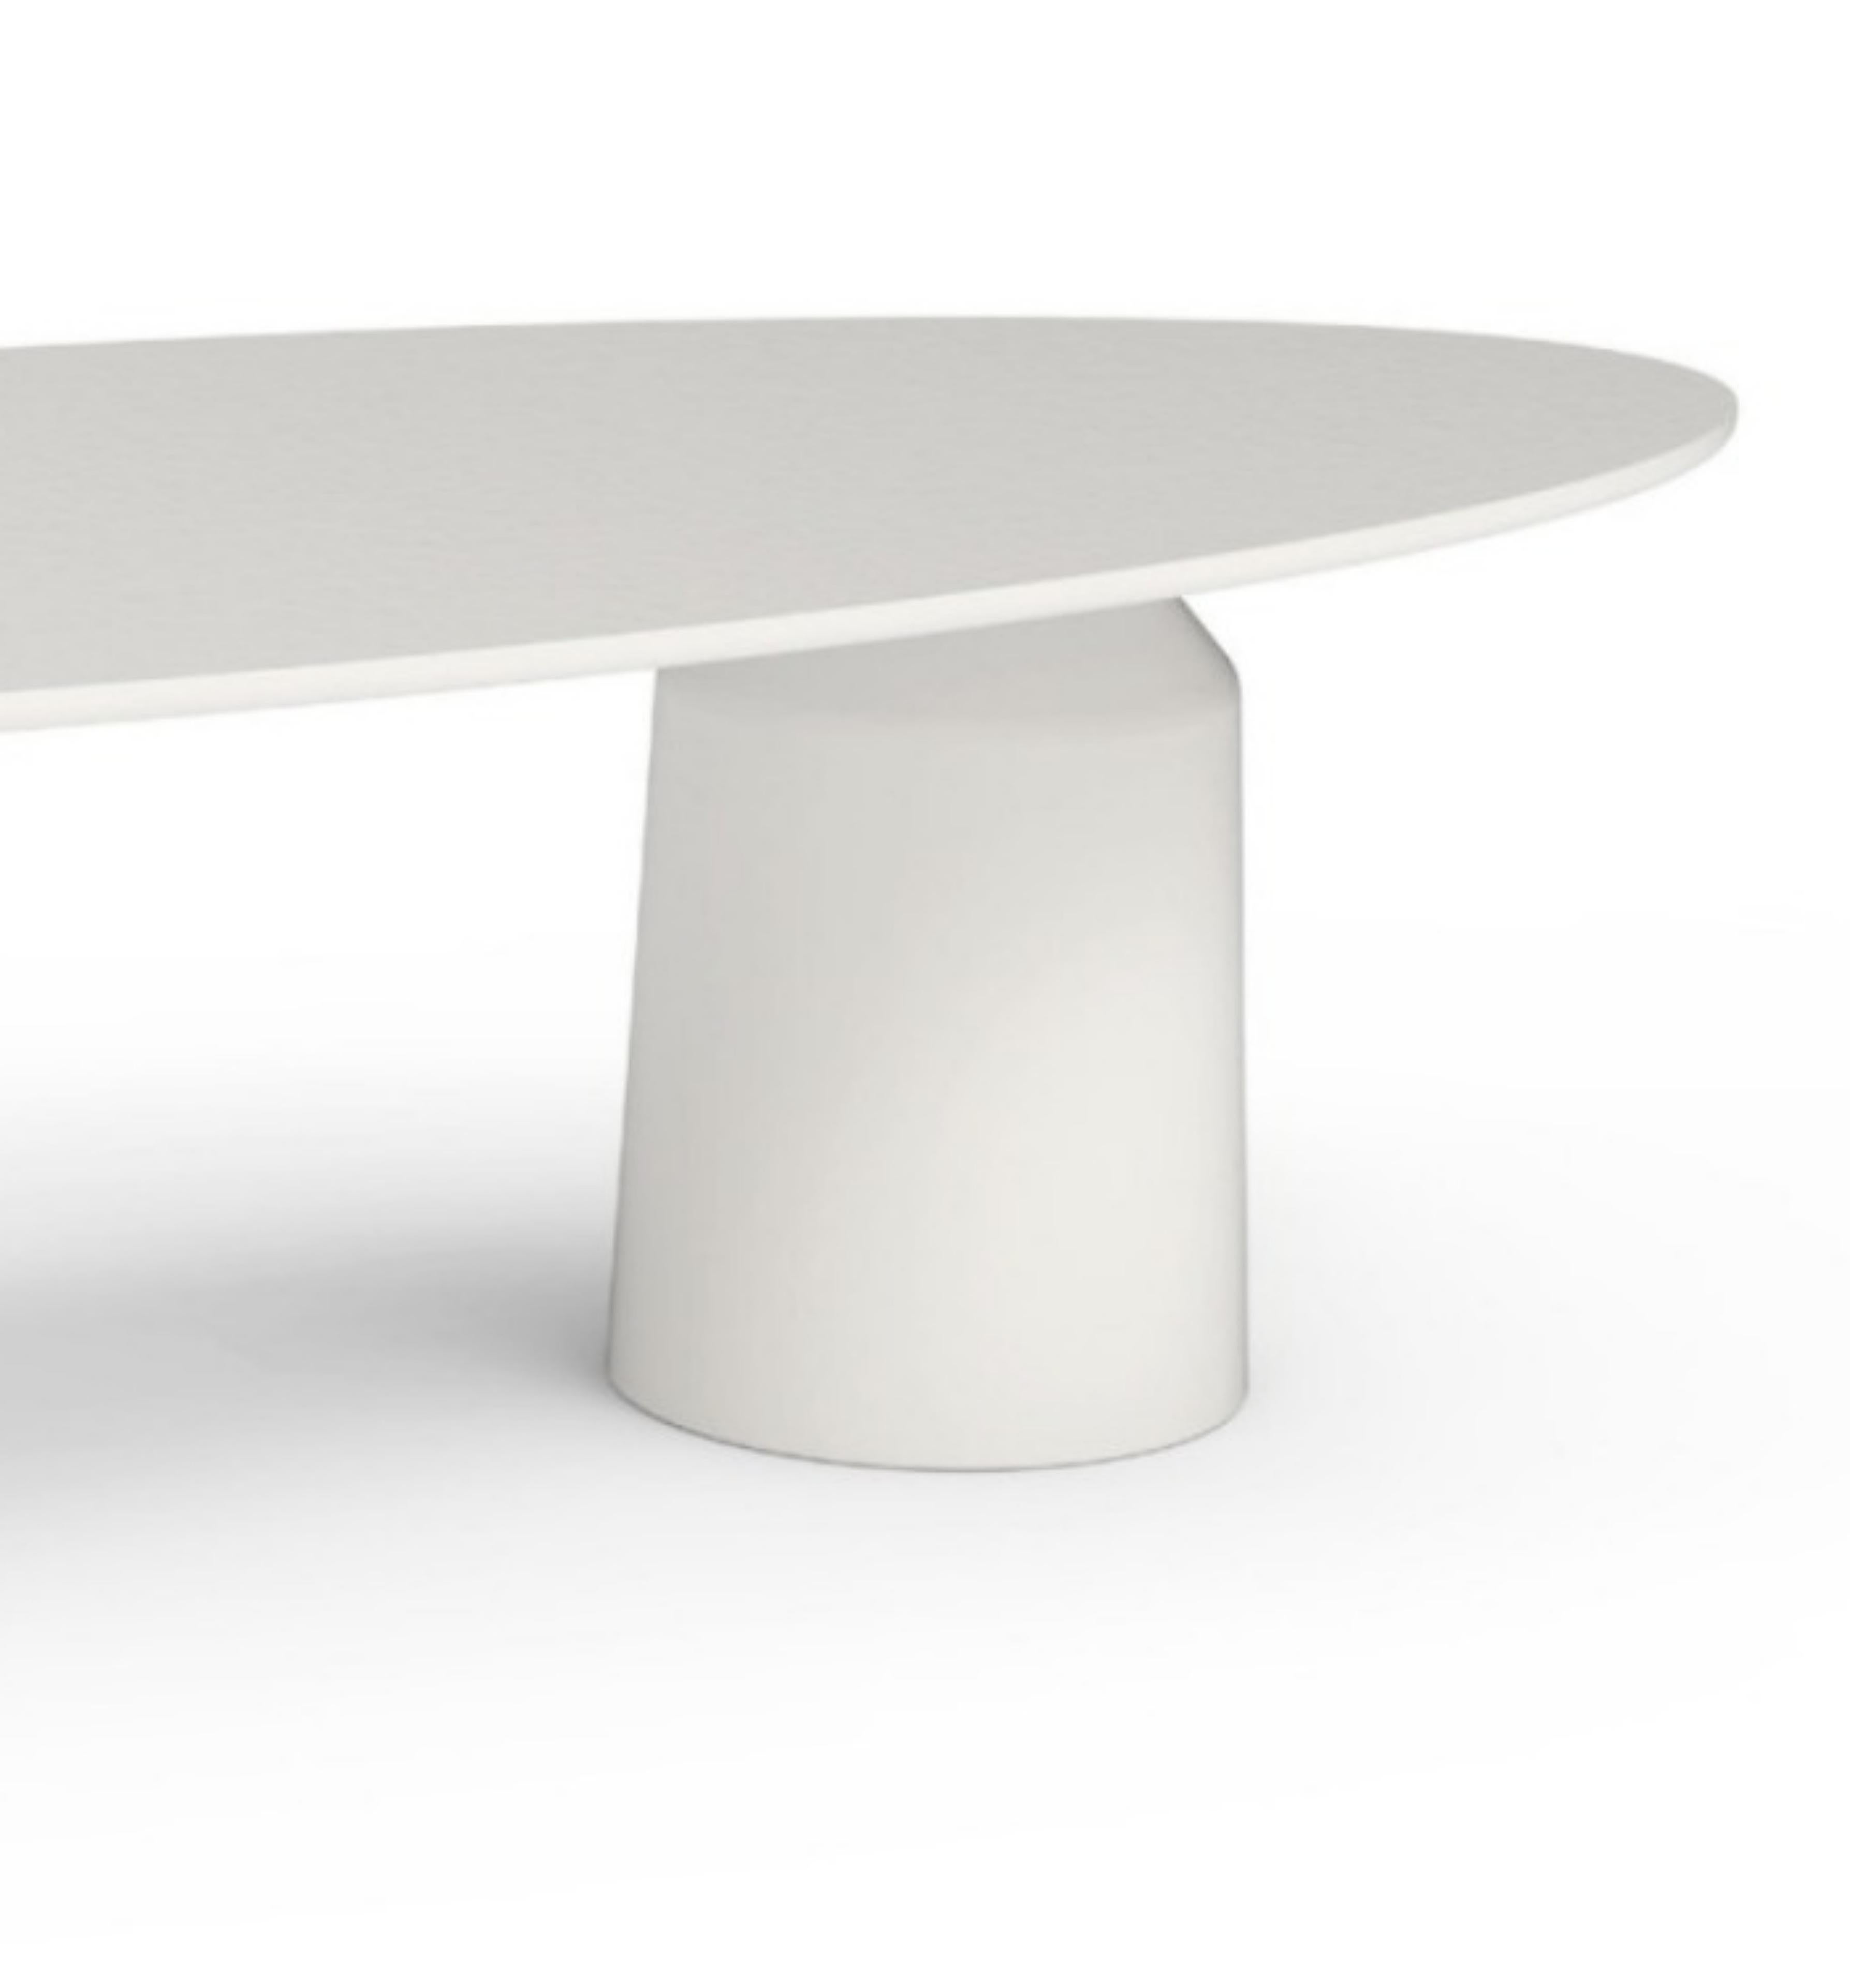 SUMMER 2024
Dining table.
The dining table is designed to elevate your outdoor dining experience. With its clean and minimalist design, featuring a round top and base, it exudes elegance and style. Crafted with durable materials, it is built to